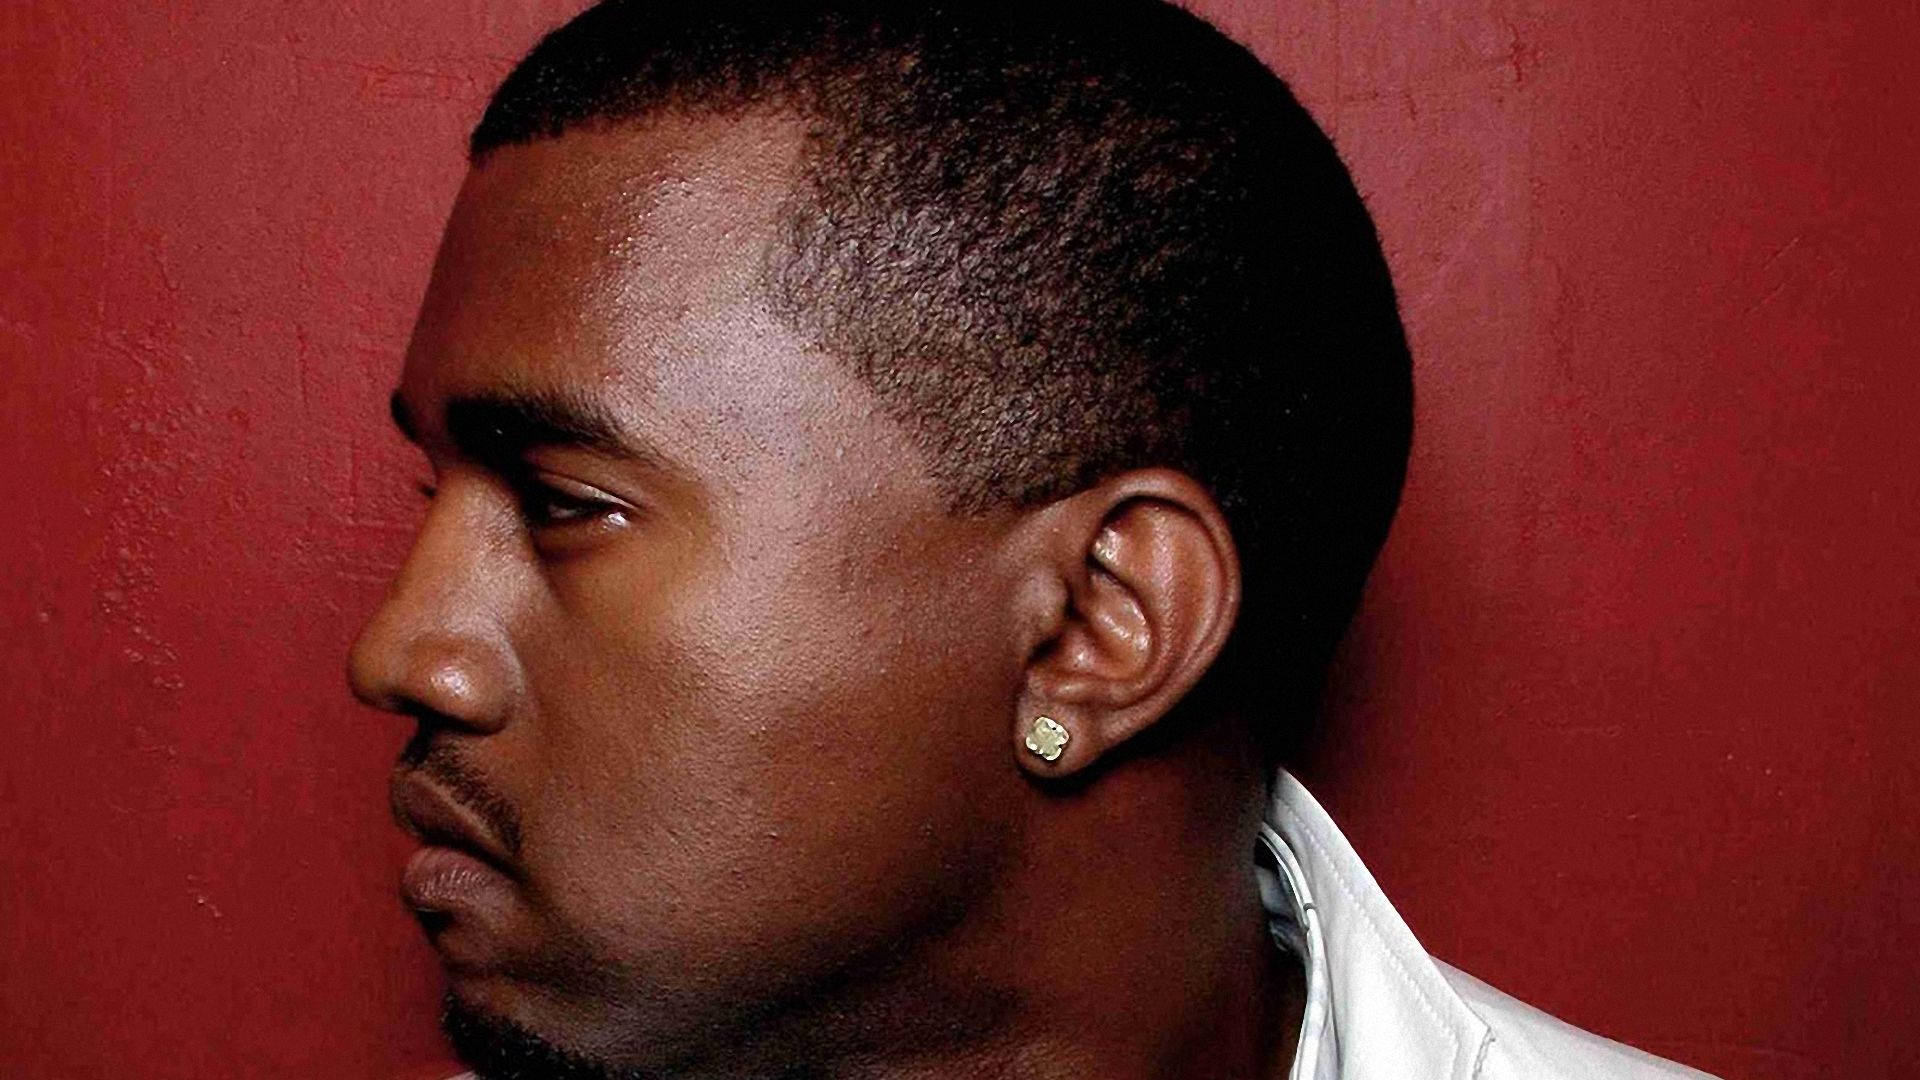 Kanye West Side View Profile Wallpaper